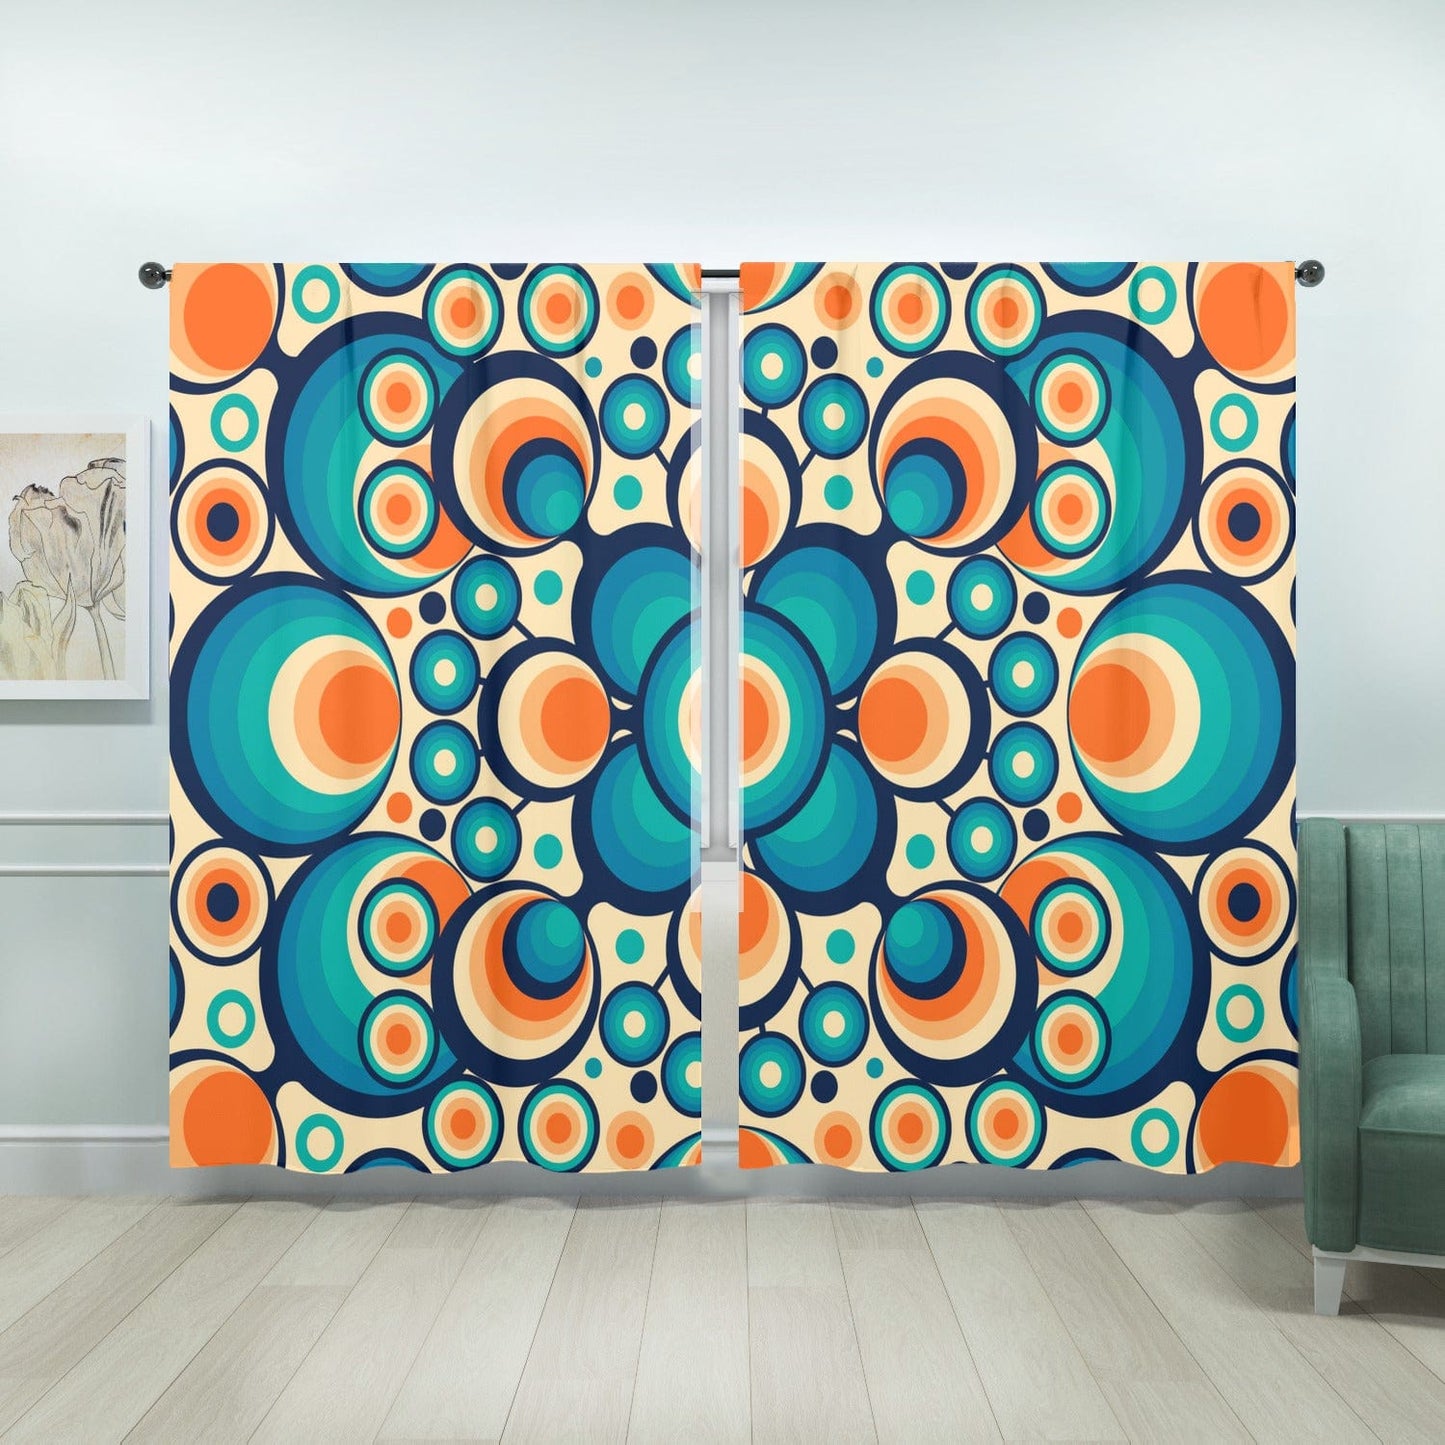 kate-mcenroe-nyc Groovy Hippie Retro Window Curtains (two panels) Curtains W104"x L84" 79656